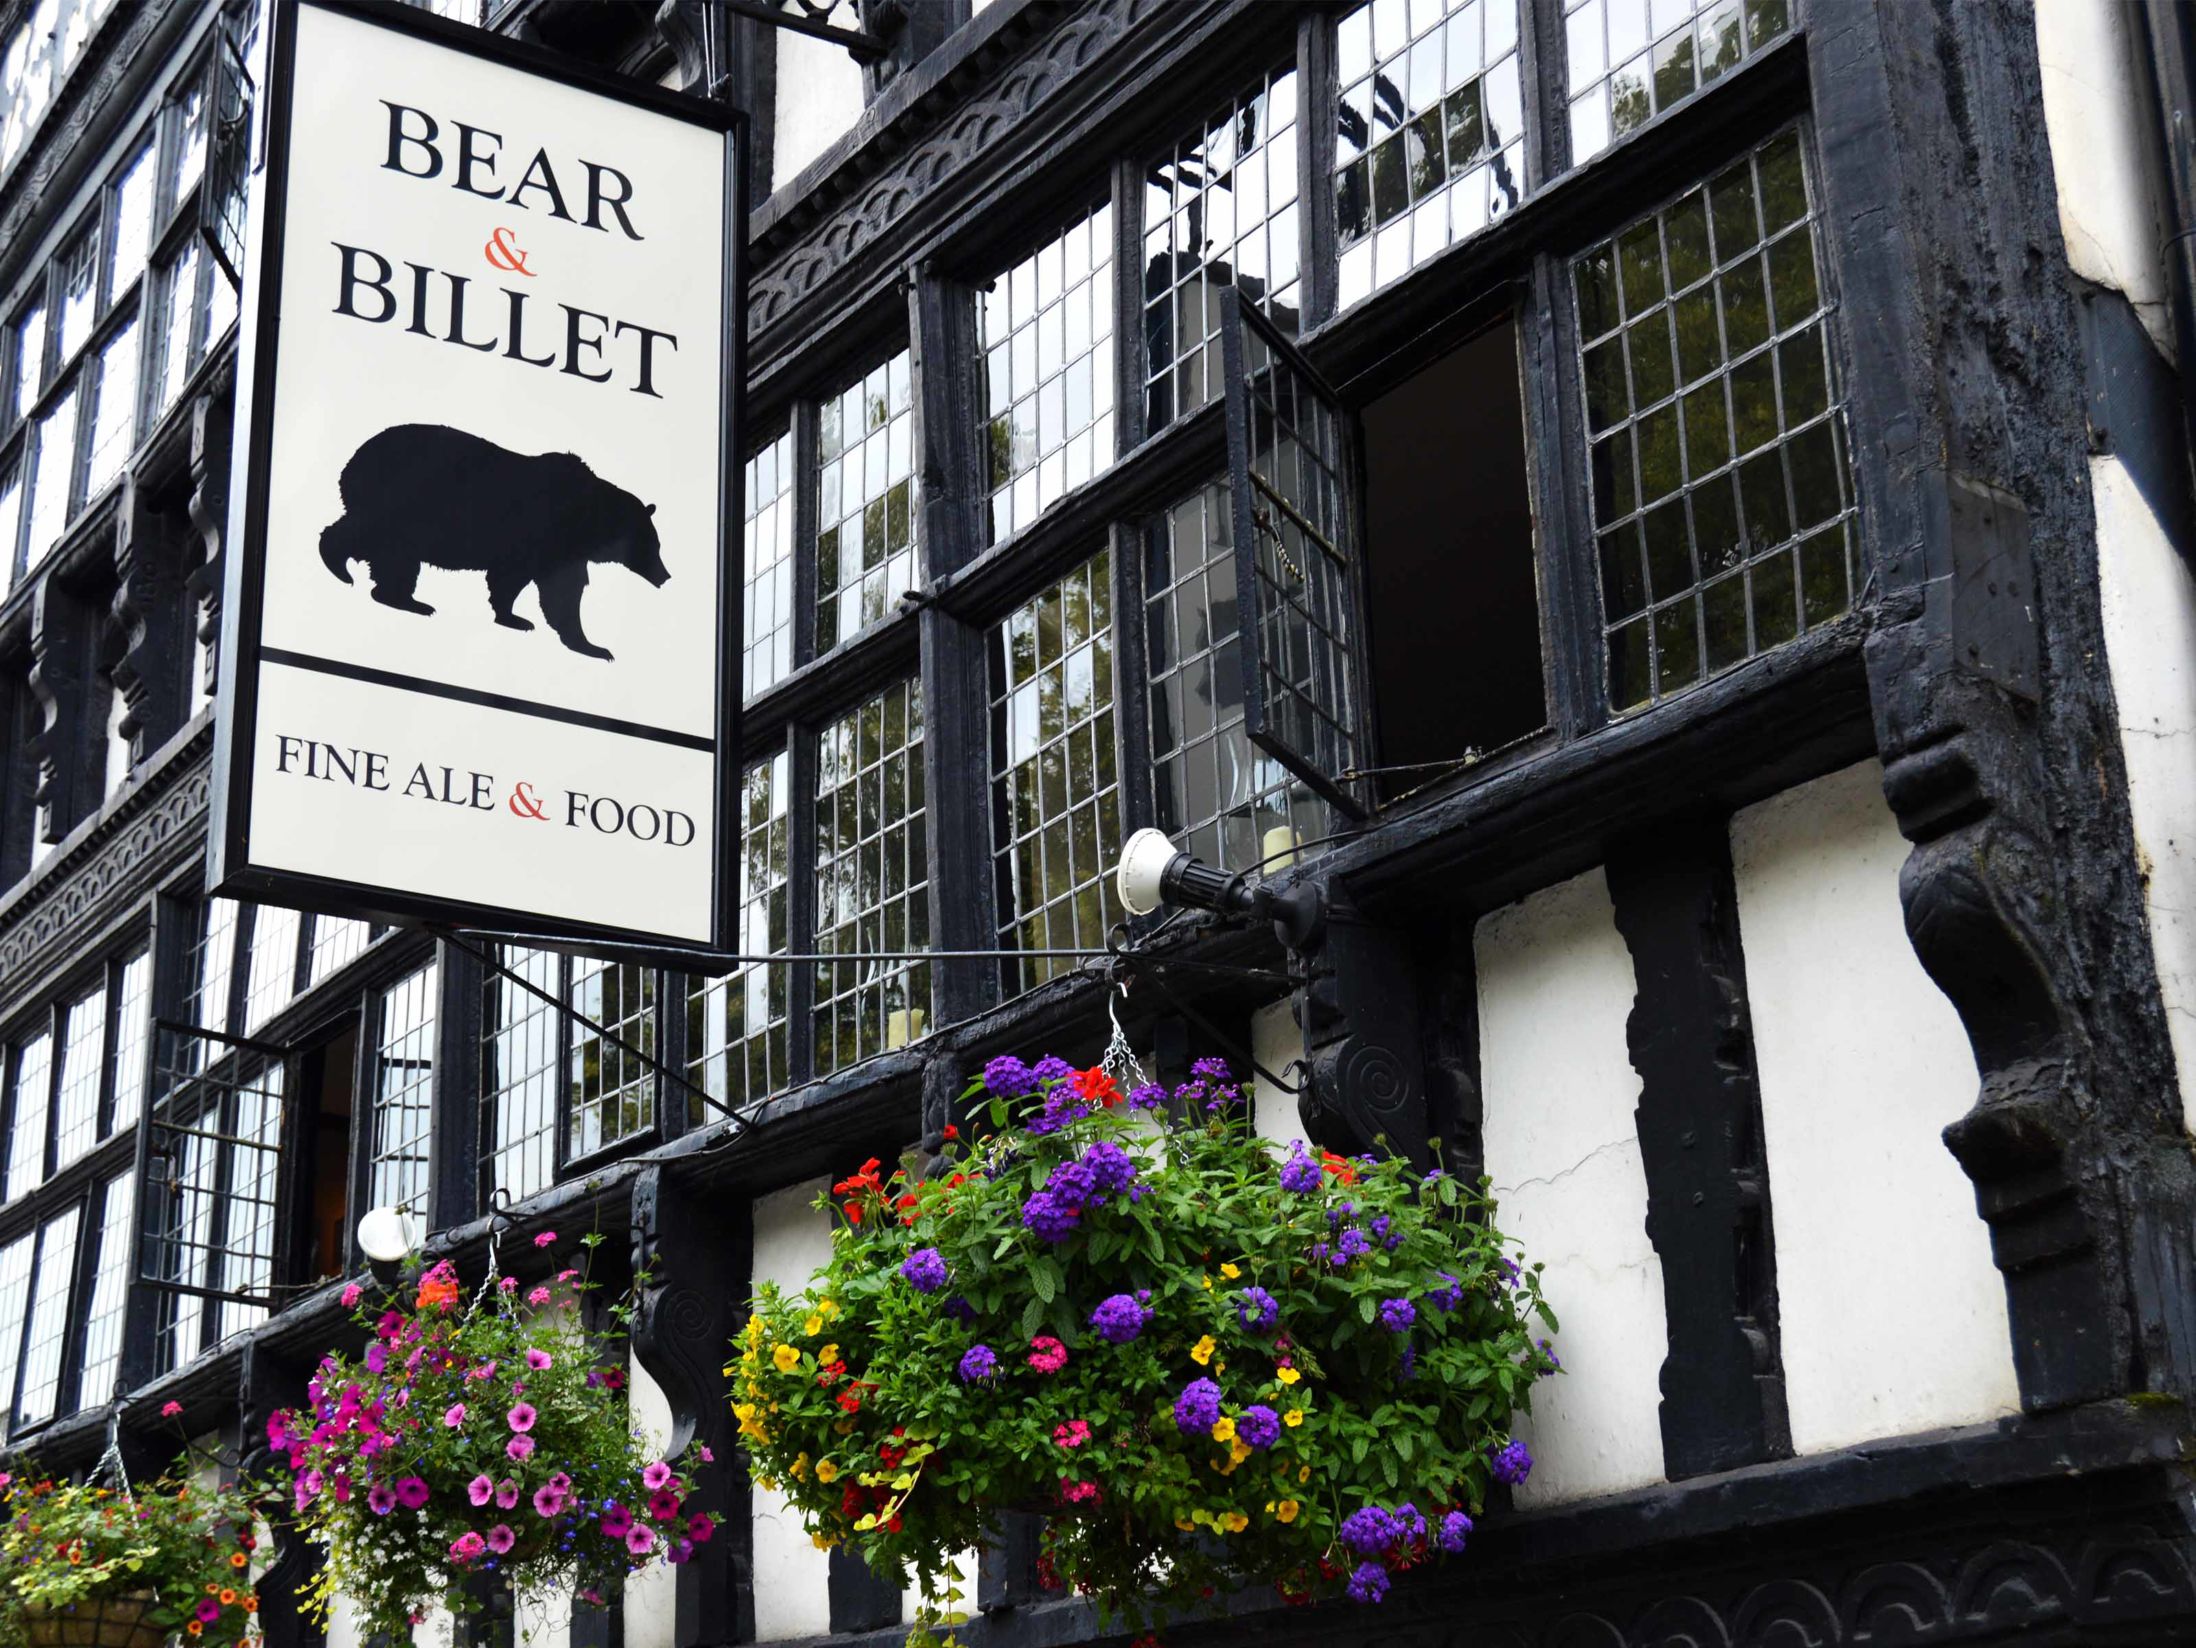 Bear & Billet - Best Real Ale Pubs in Chester